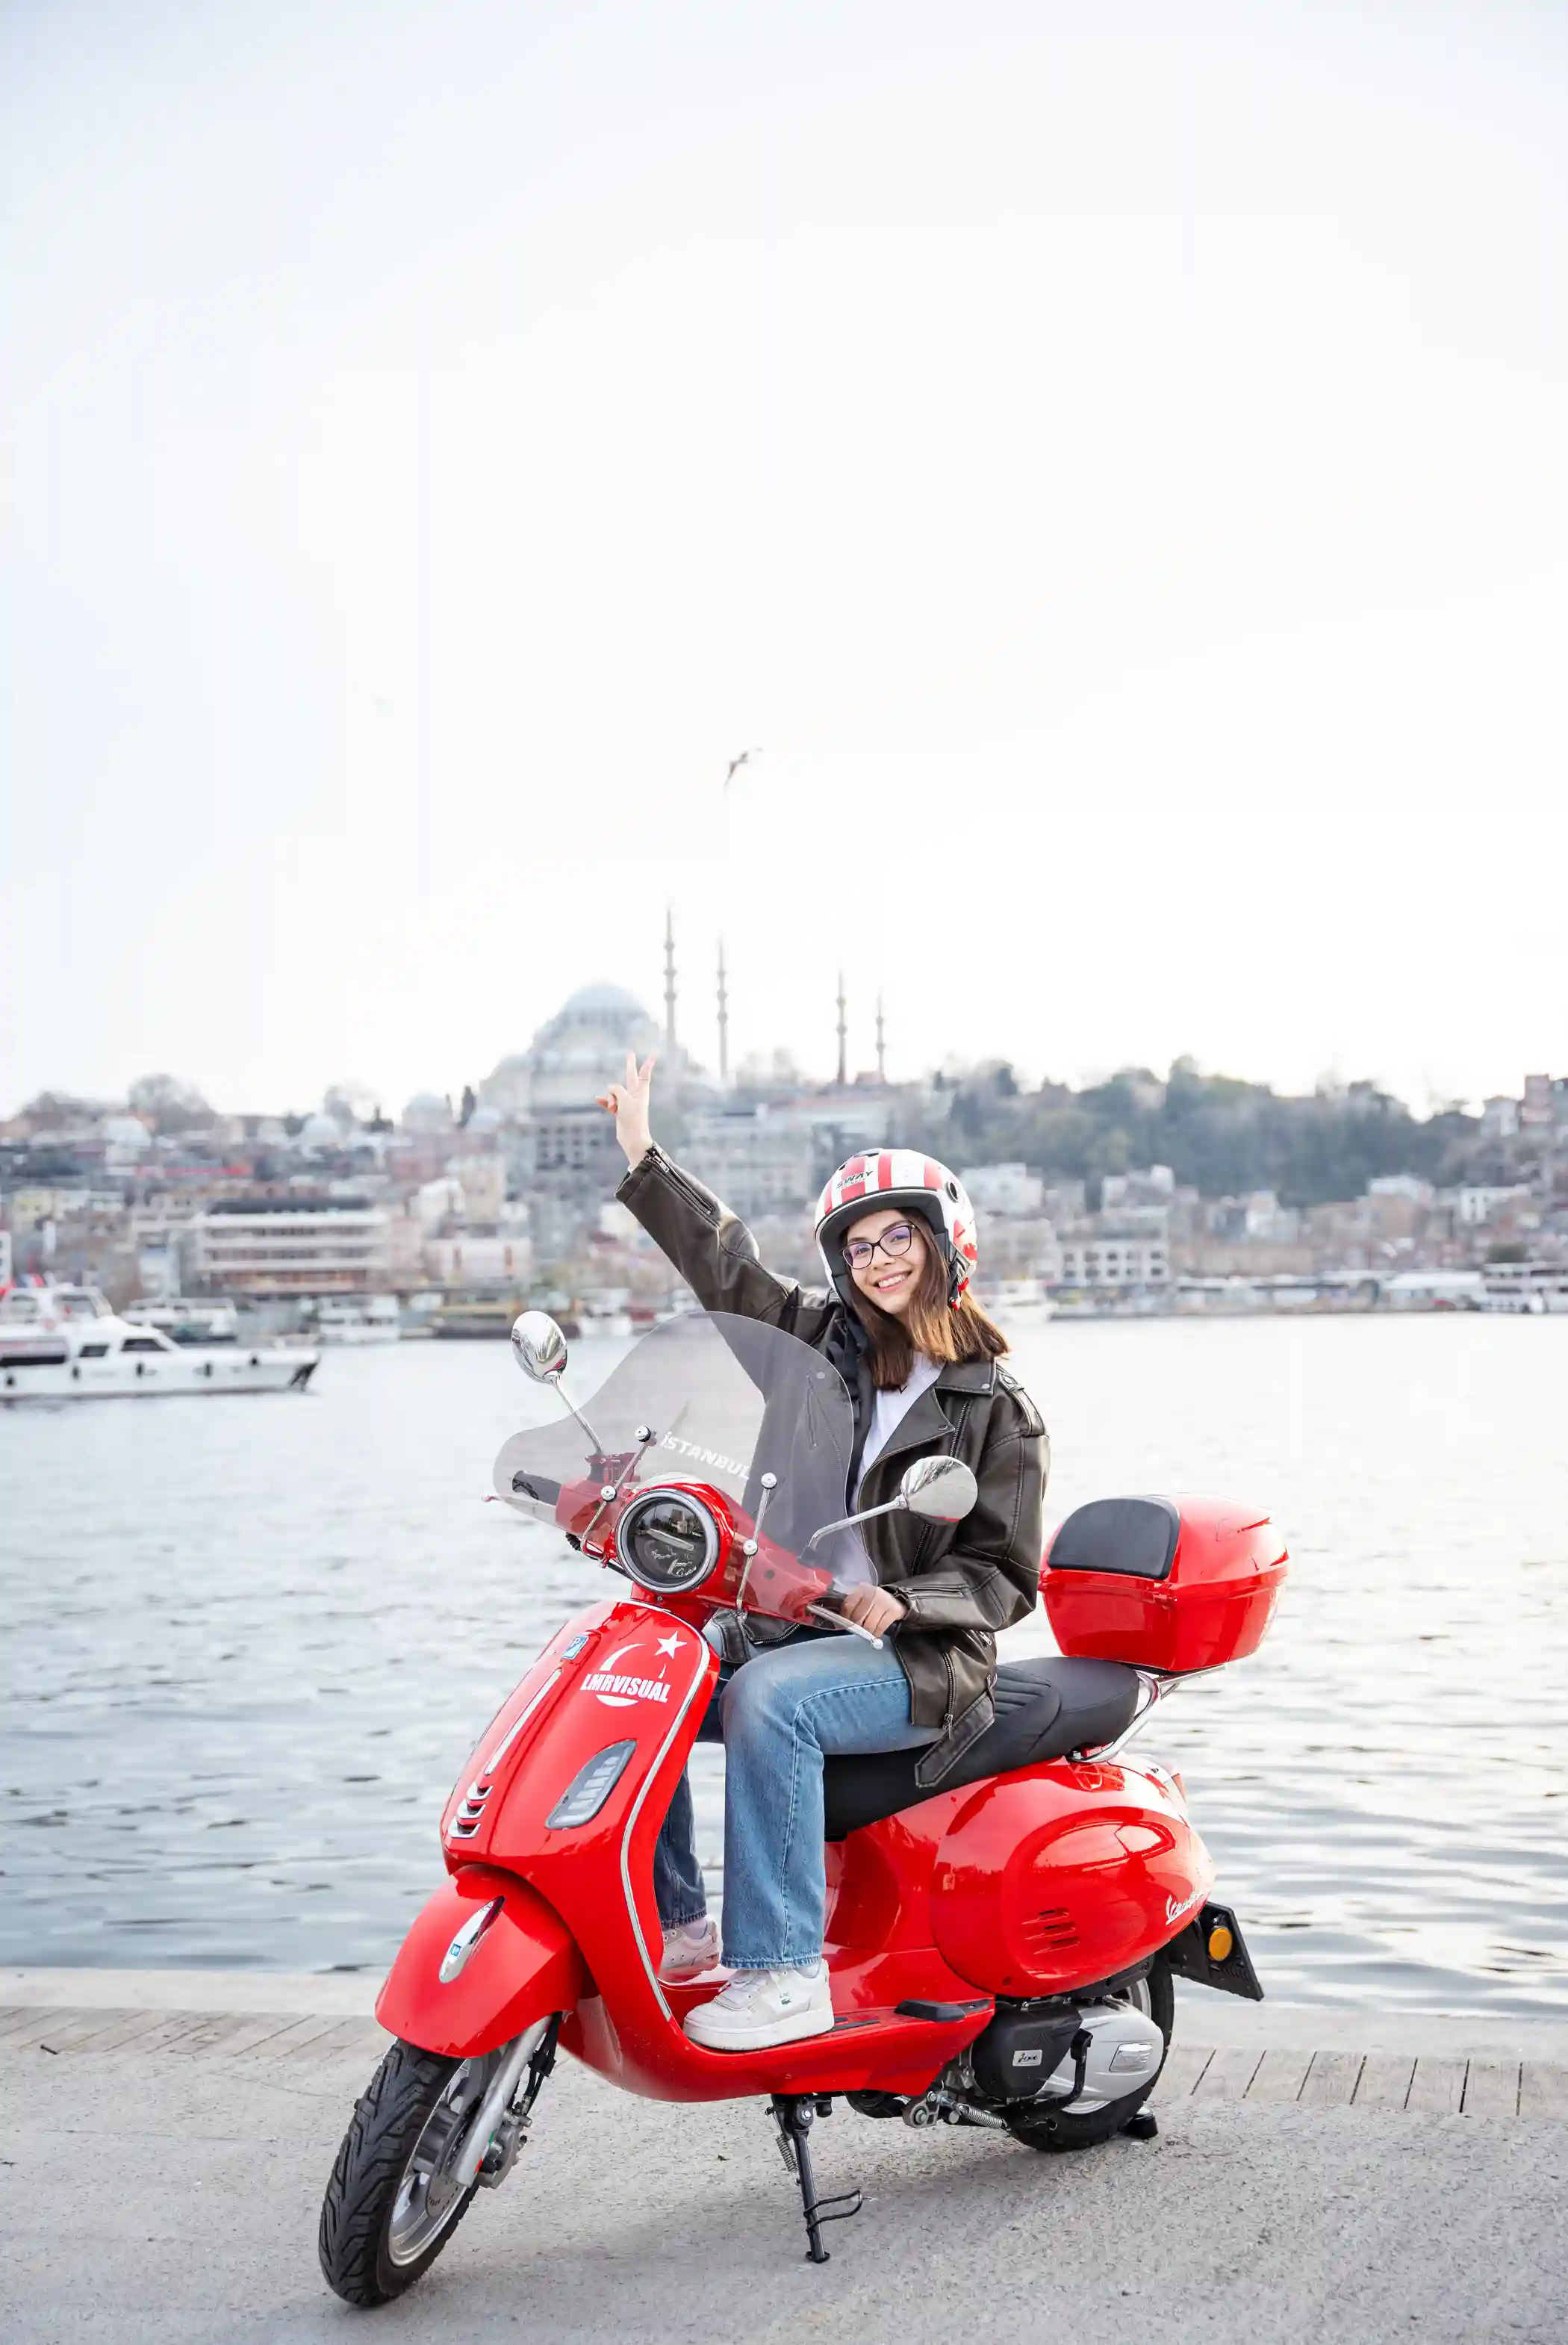 As the day draws to a close and the sun begins to set over the city skyline, the couple takes a moment to savor the beauty of Istanbul at twilight, their hearts full of love and gratitude for the unforgettable experience they've shared together. With each photograph serving as a cherished memory of their Vespa tour through Istanbul, the couple bids farewell to the city, their love story forever captured in the timeless beauty of the photographs.